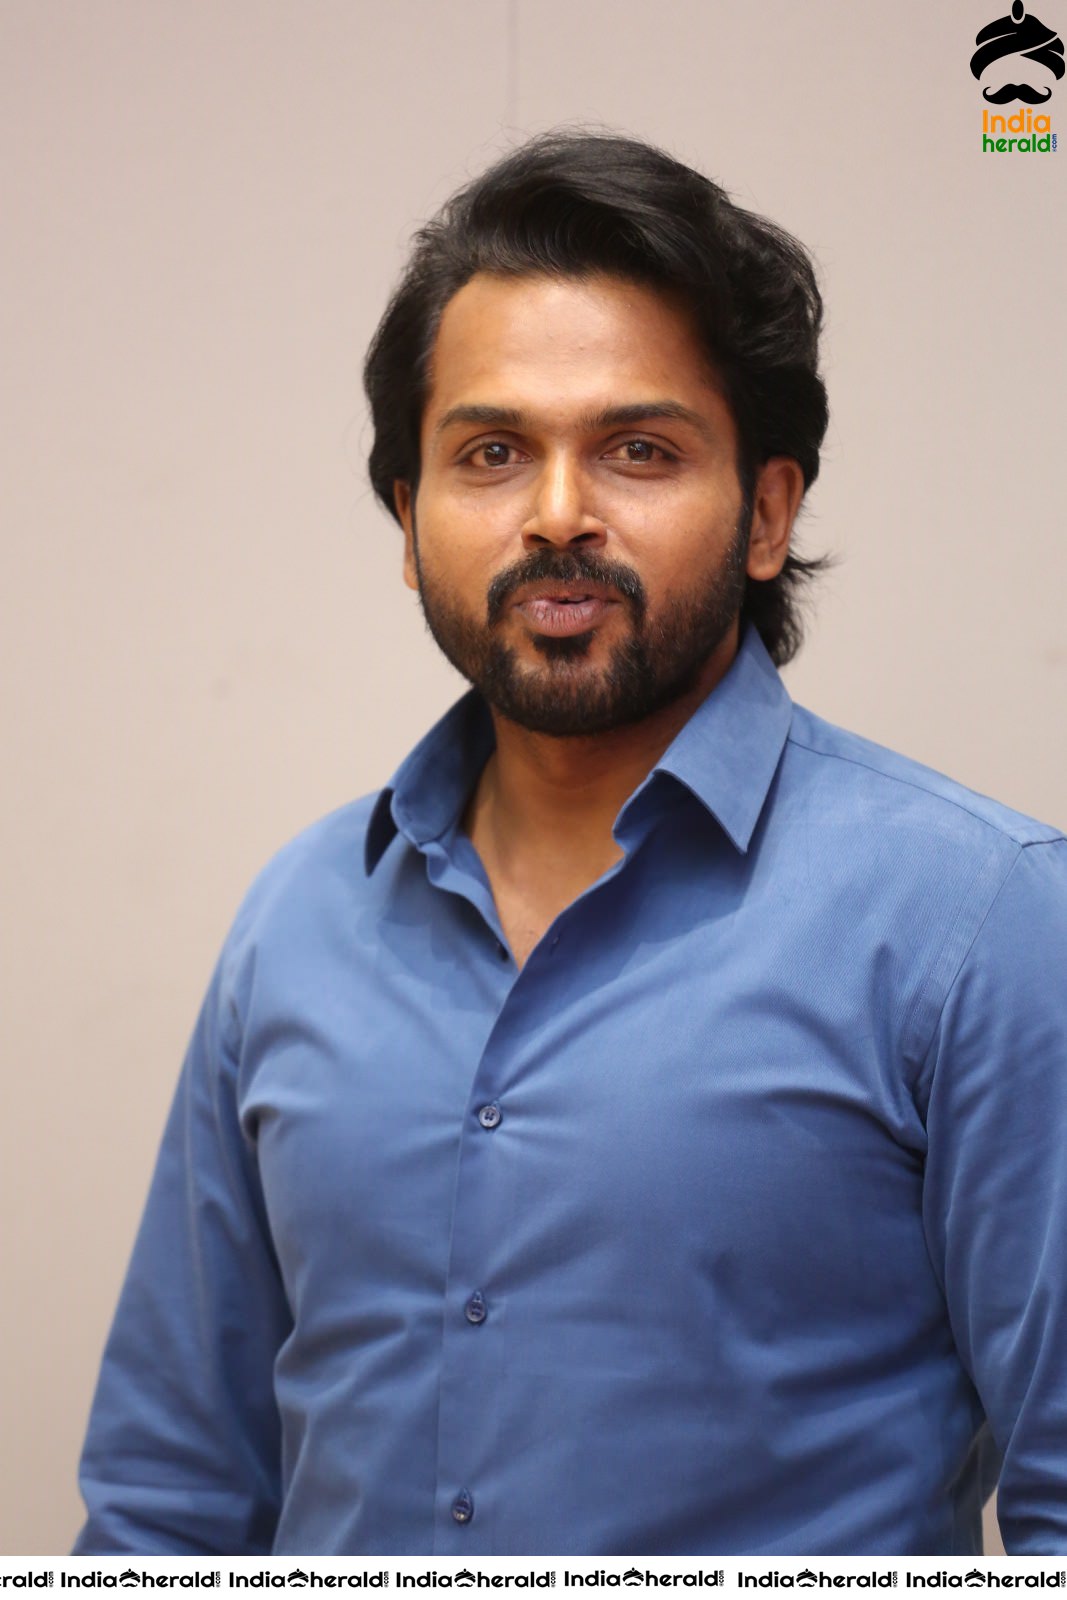 Actor Karthi Looking Suave in these latest Clicks Set 2